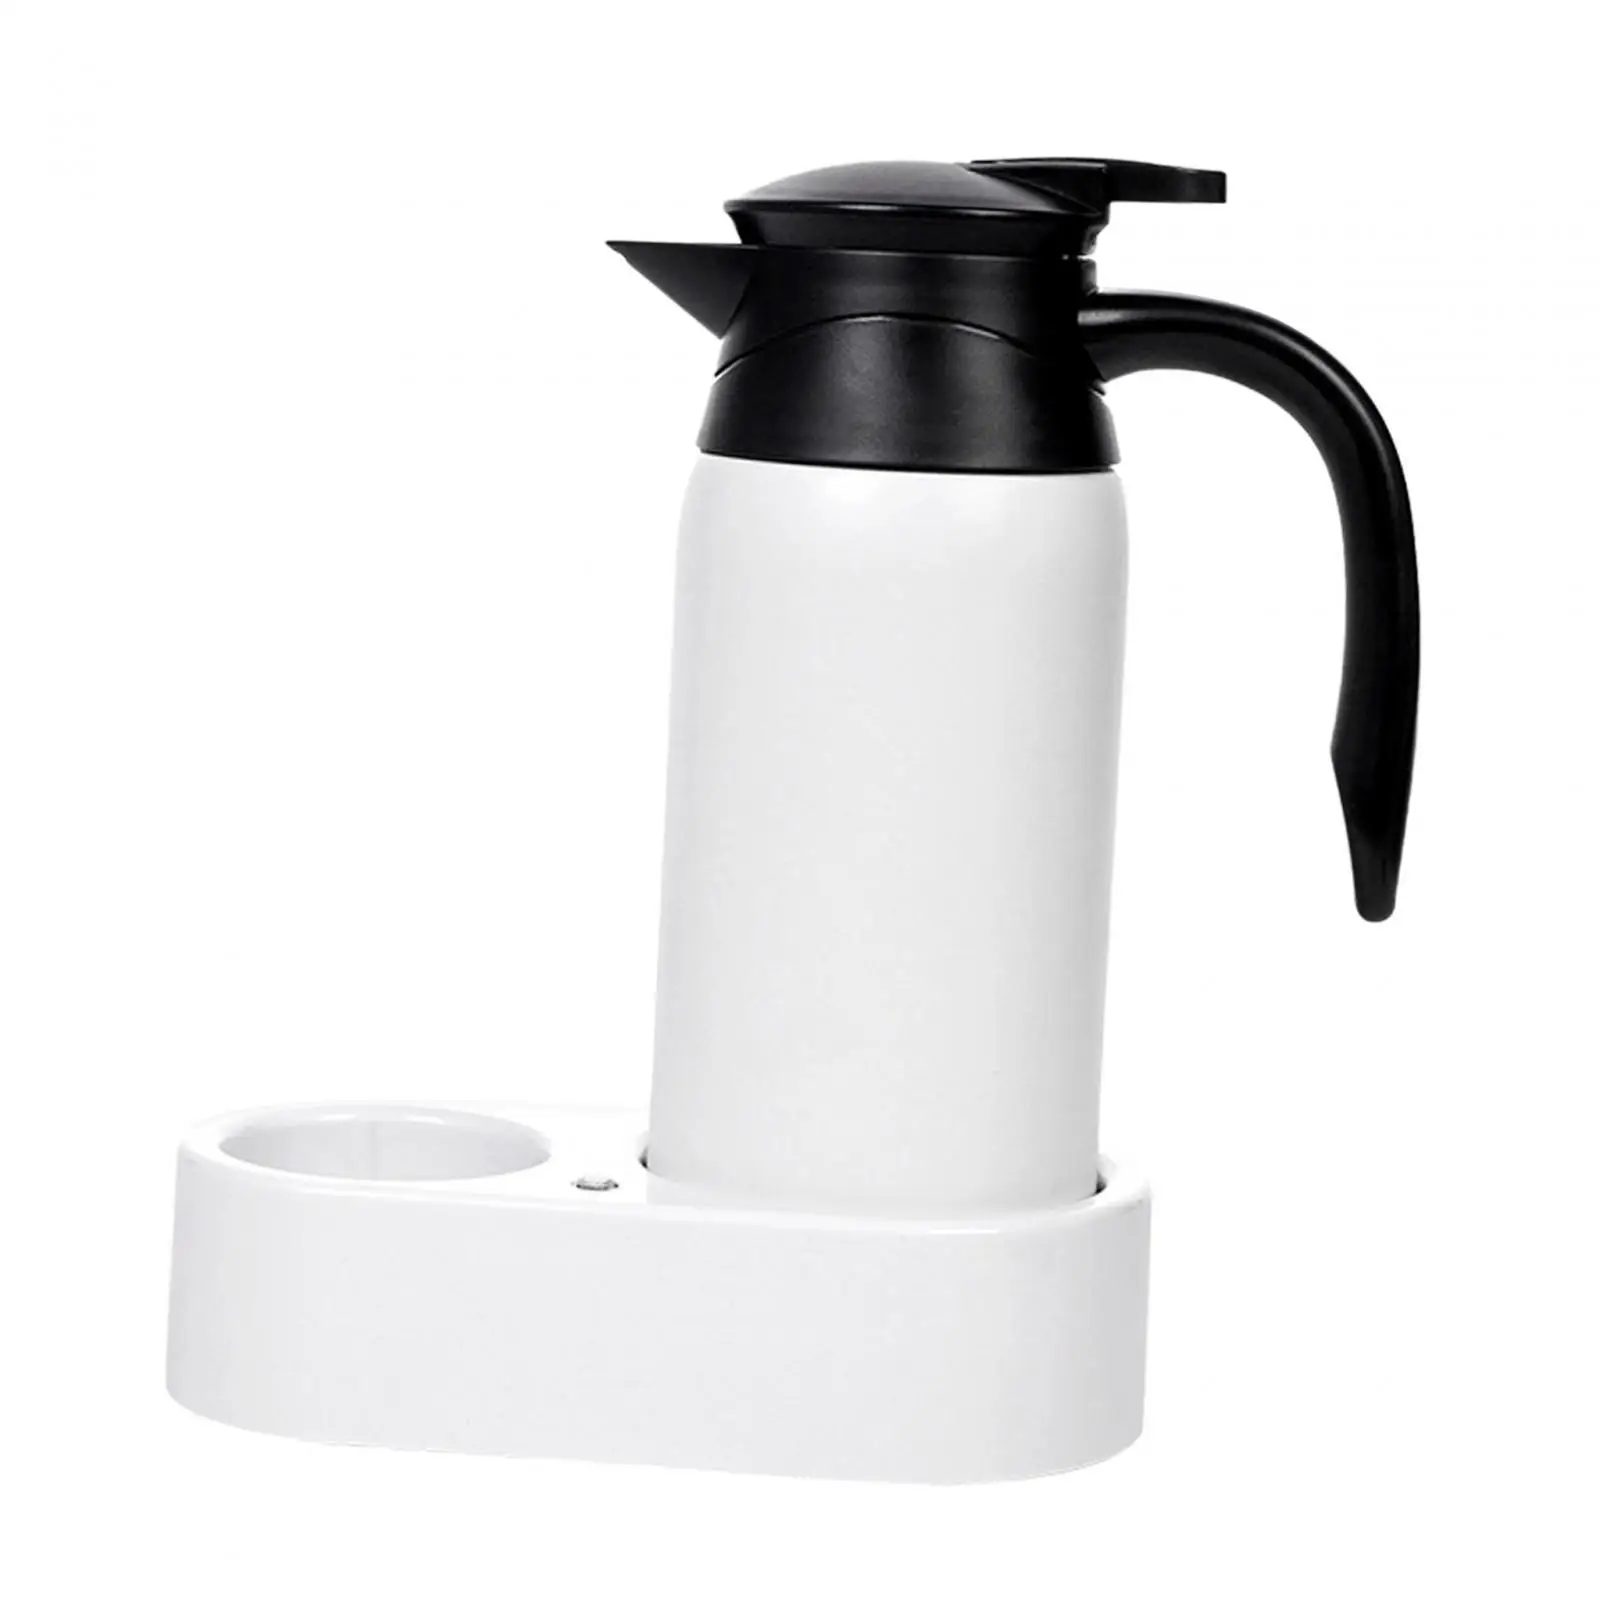 12V 24V 800ml Car Kettle Electric Water Kettle Portable for Tea Coffee